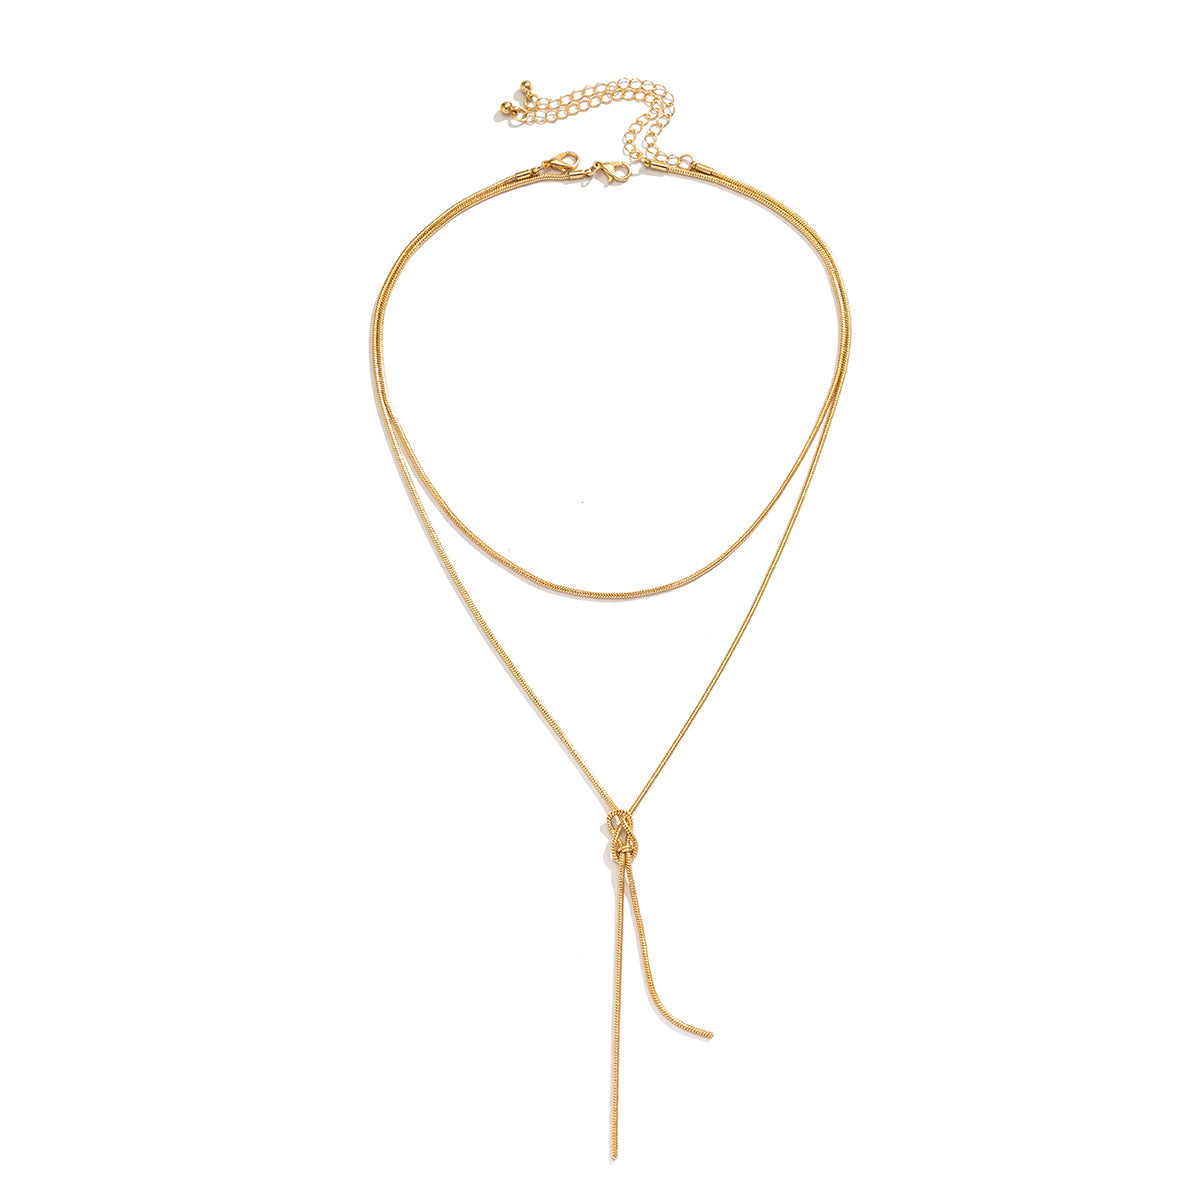 European and American Cross-border Jewelry Modern Twist Snake Chain Necklace with Tassel Pendant